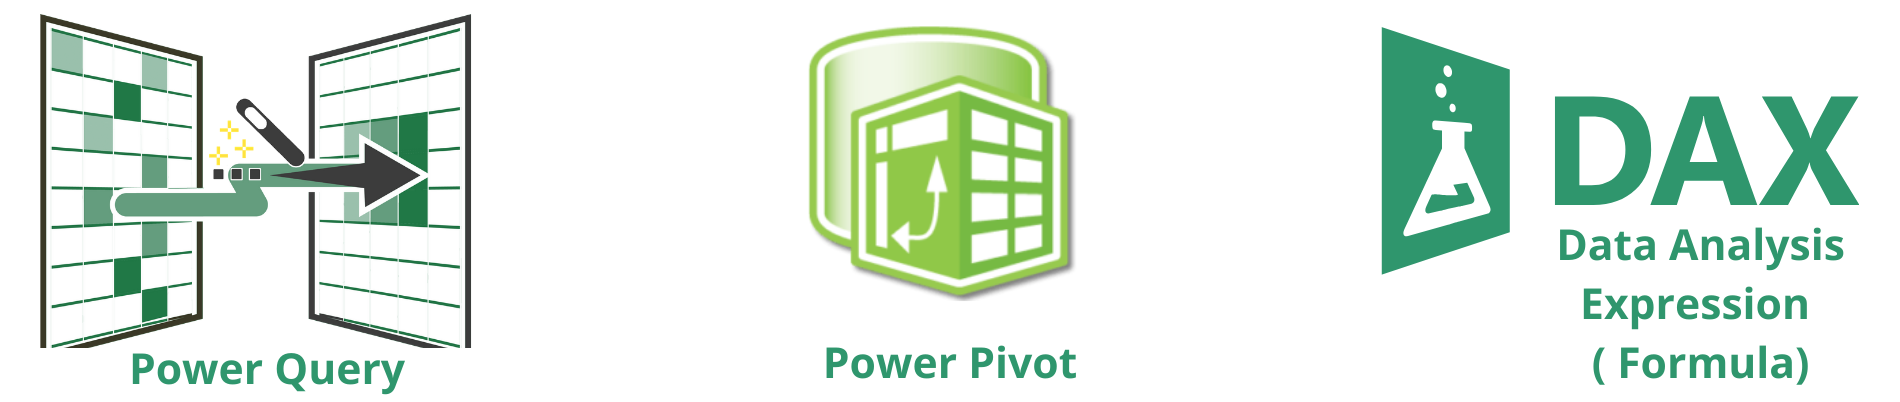 power pivot and dax courses